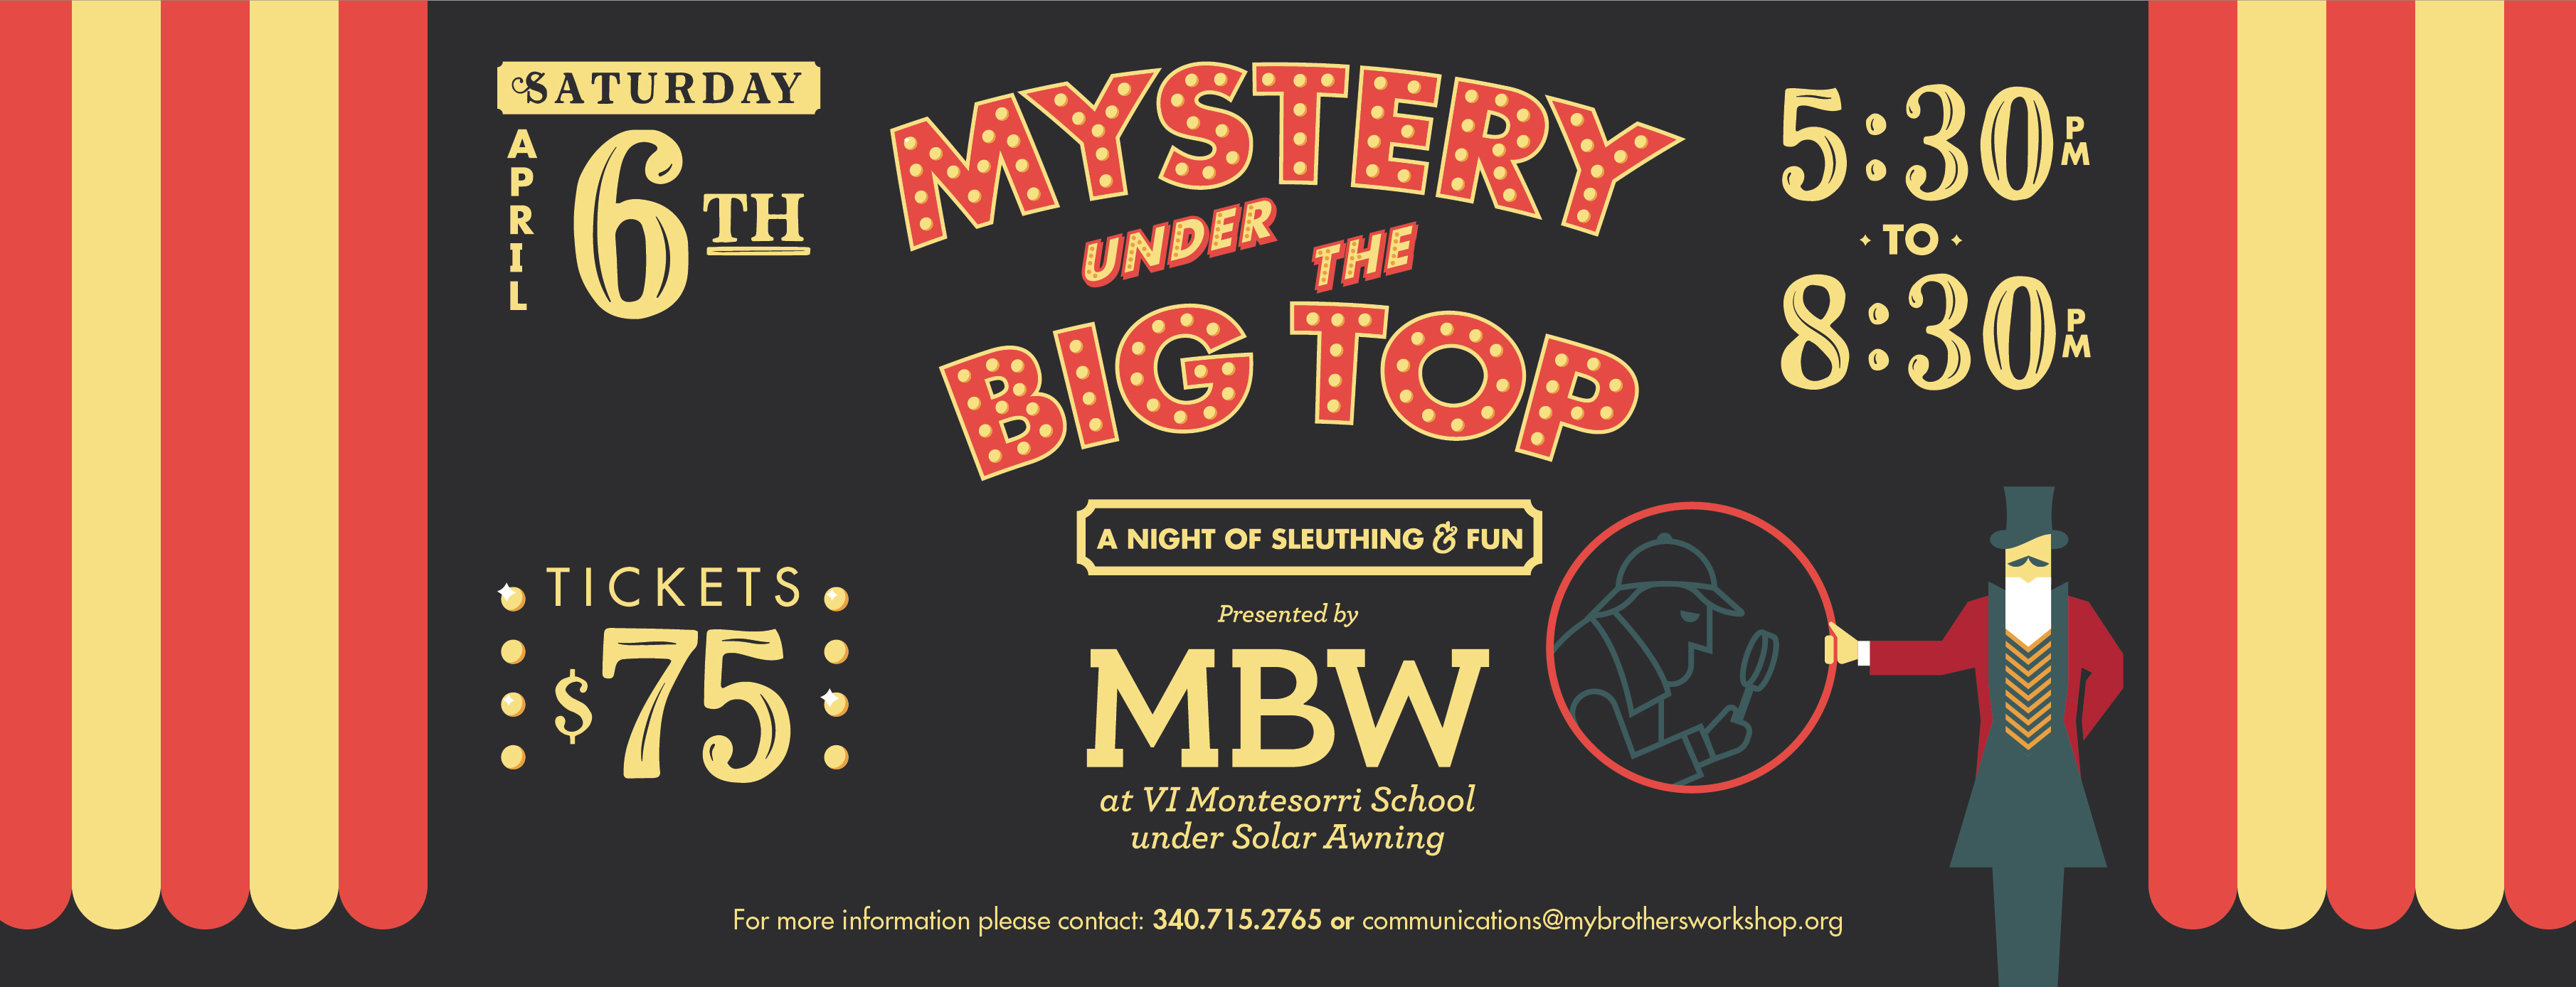 MBW’s 2nd Annual Mystery Event Will Take Place In Eight Days At Montessori School